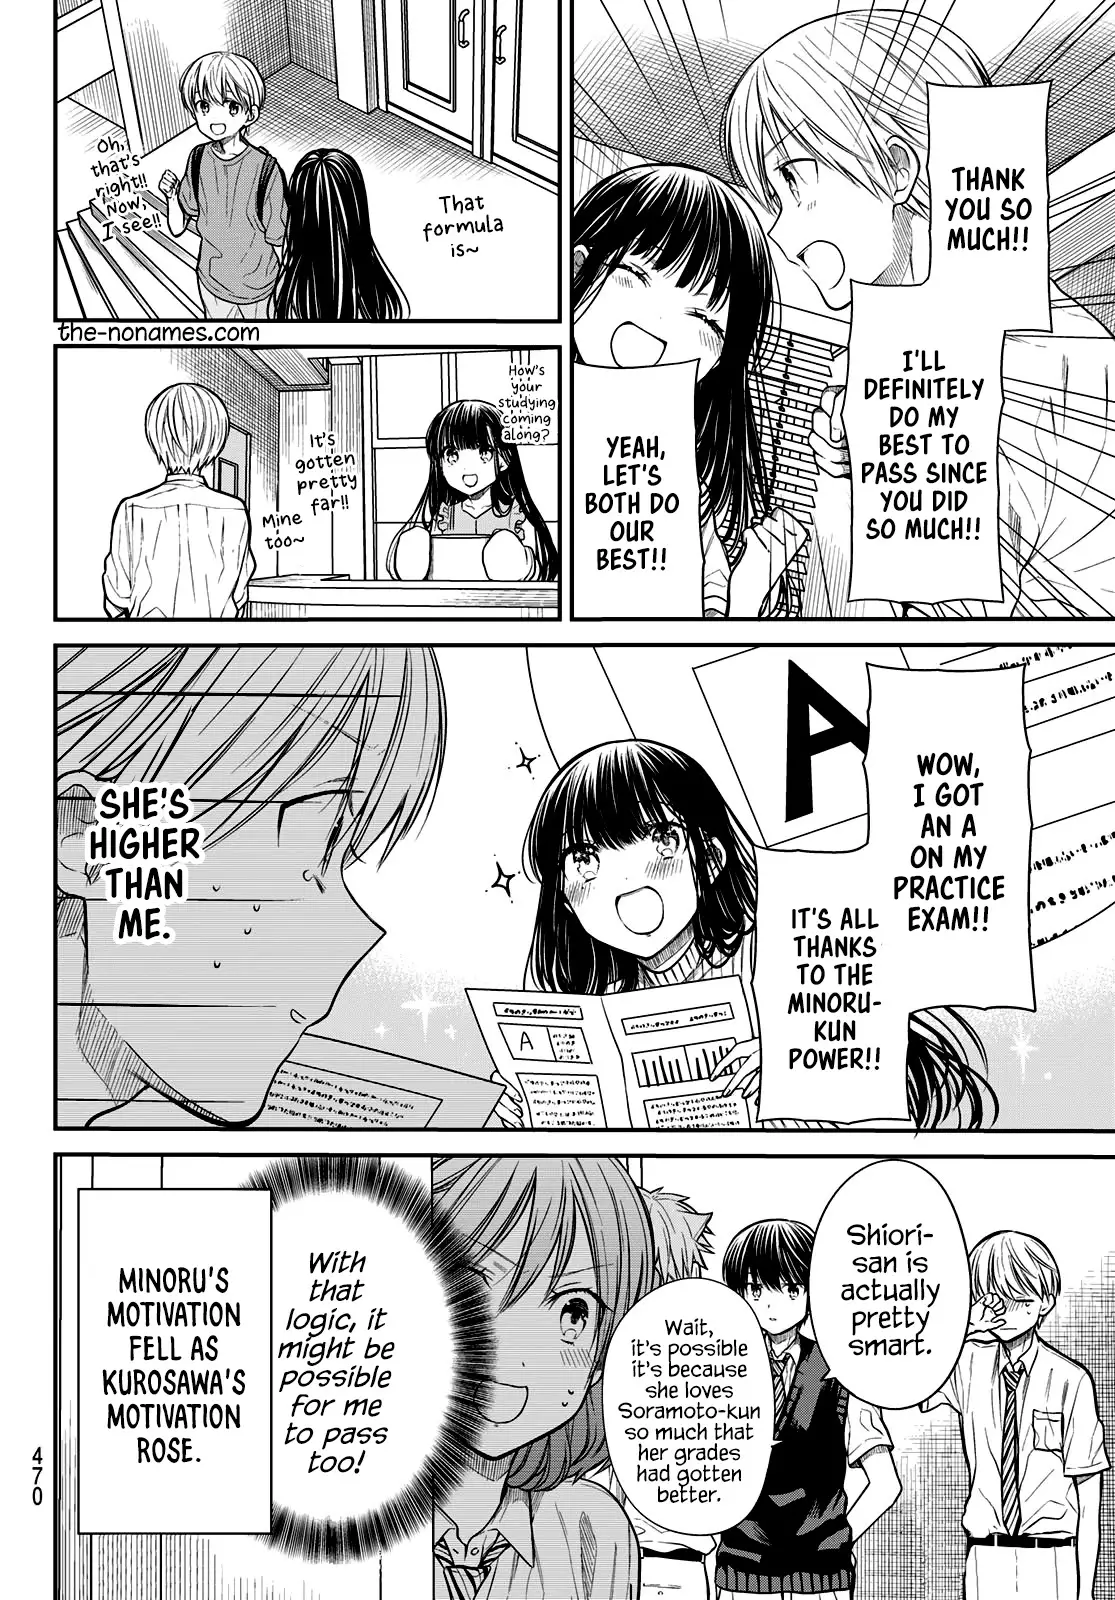 The Story Of An Onee-San Who Wants To Keep A High School Boy - 248 page 5